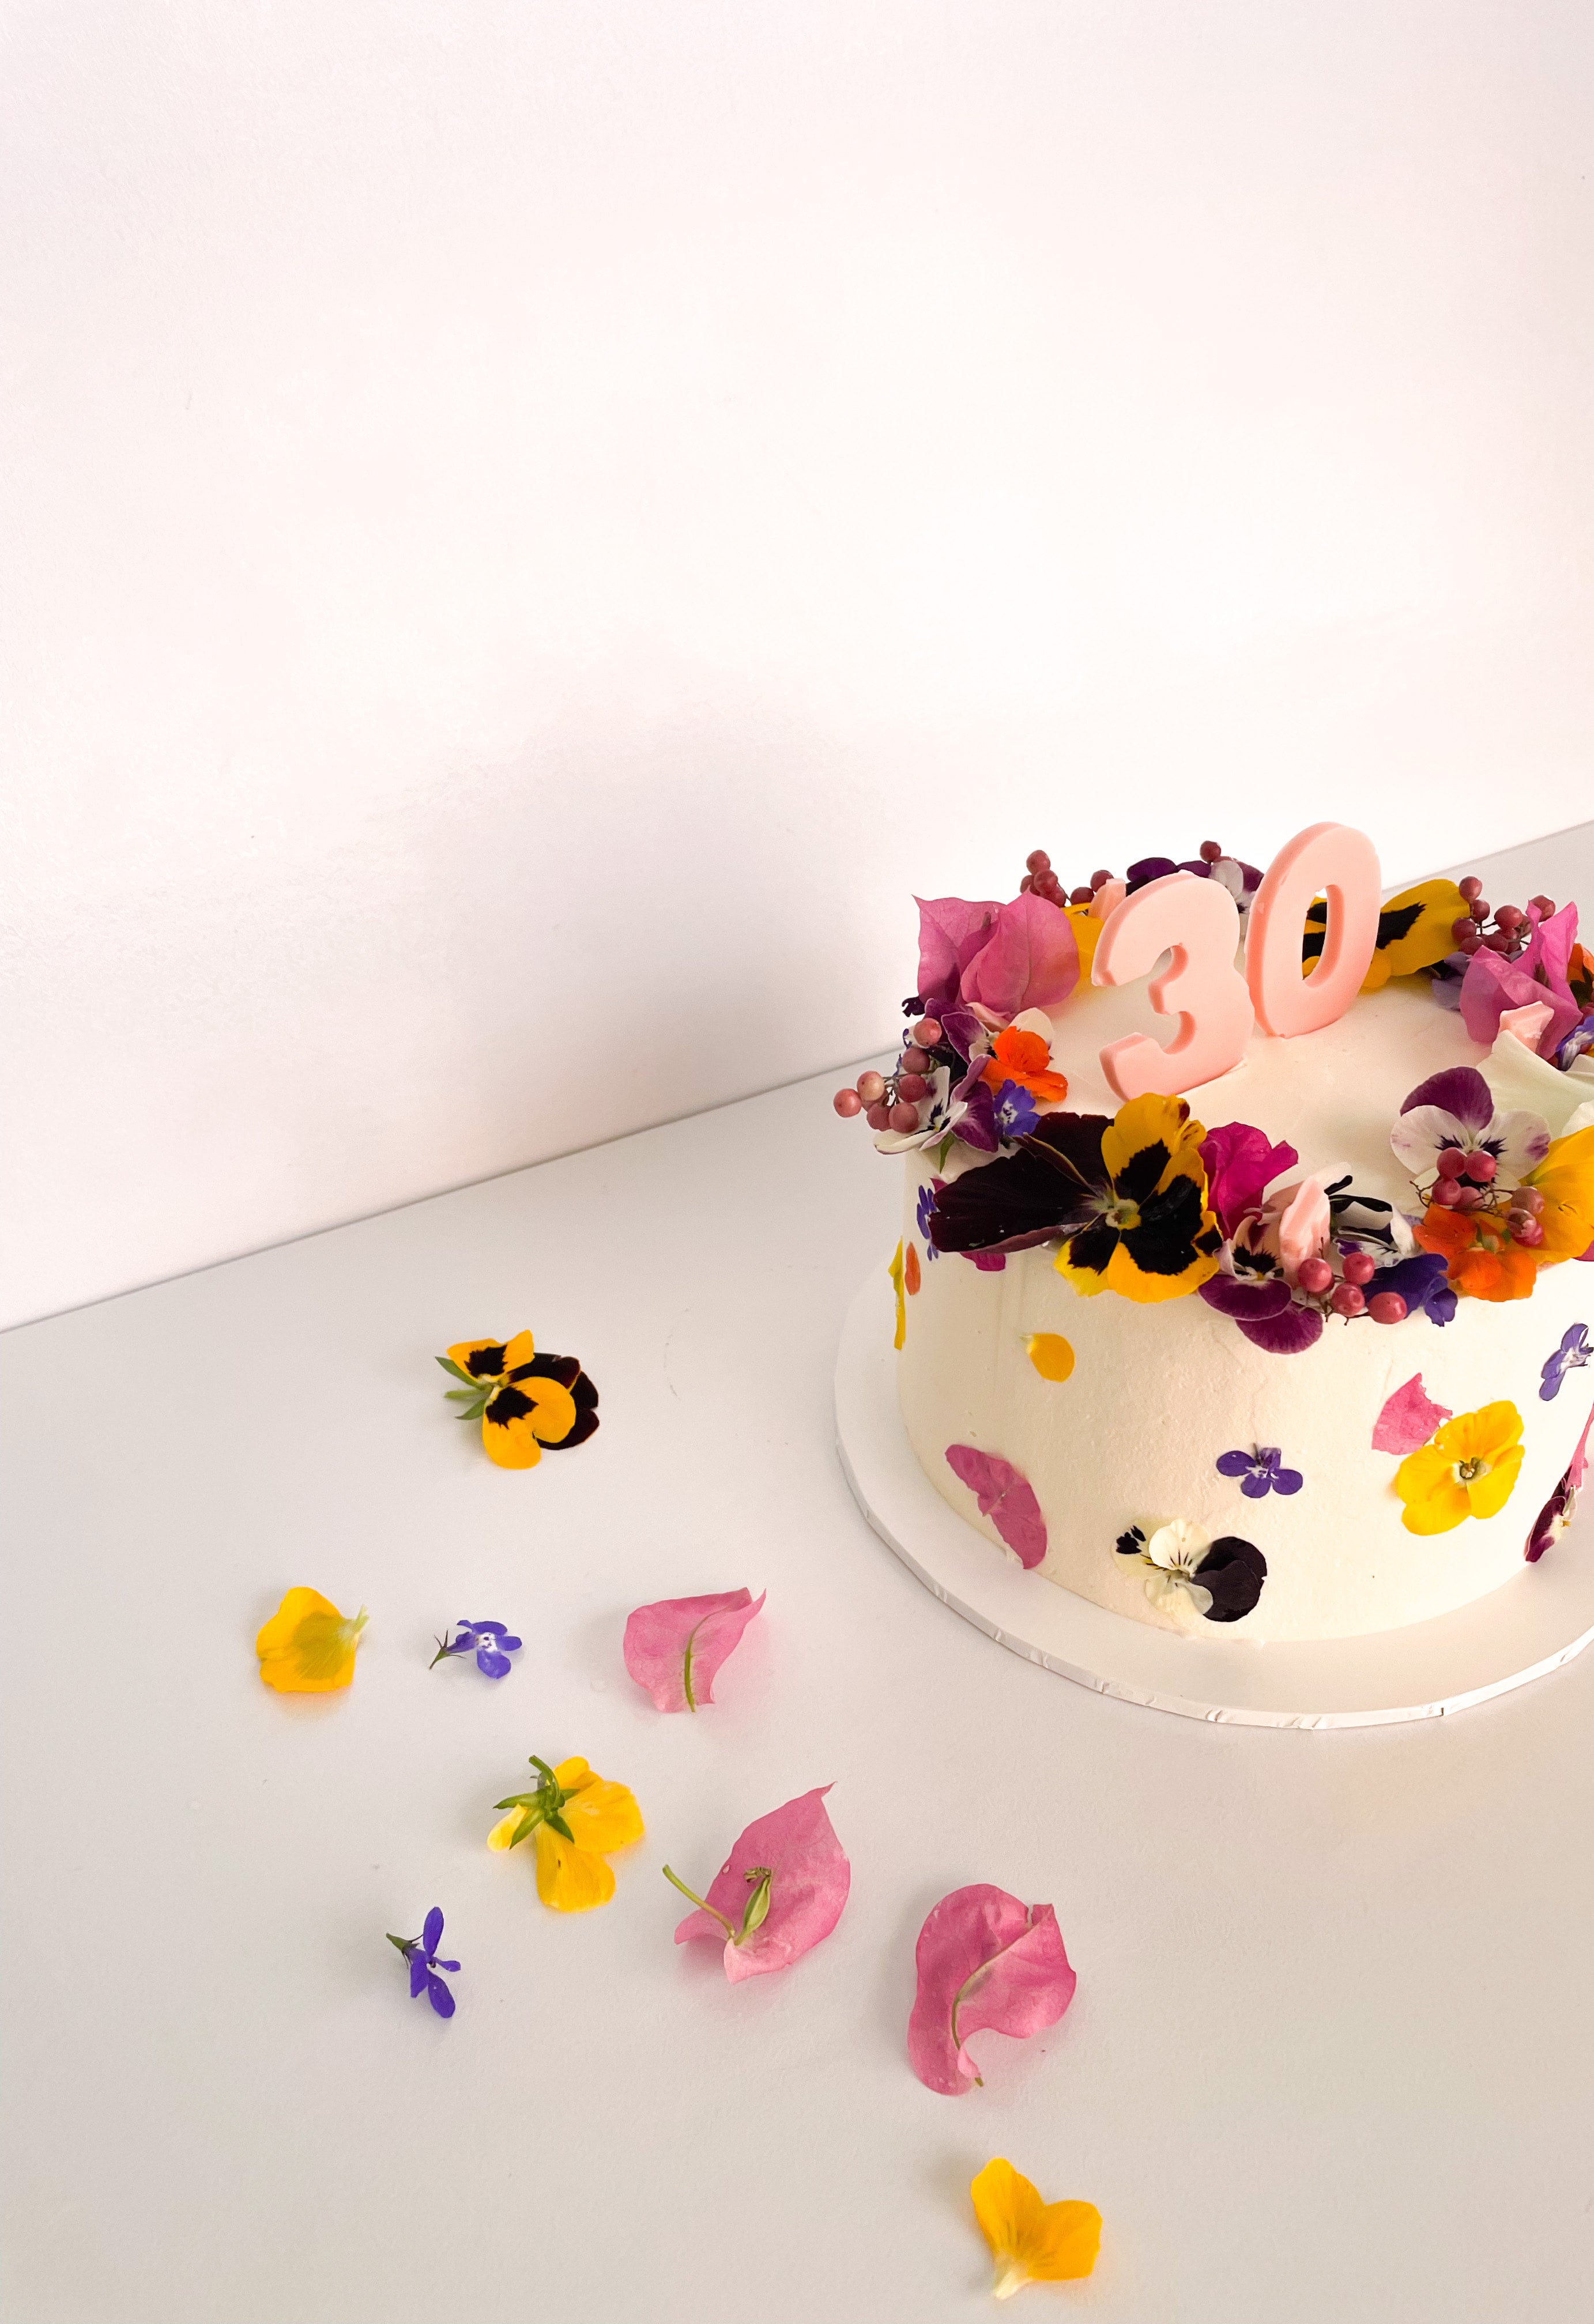 Edible Pressed Flowers for Decoration | Eat Your Flowers by Loria